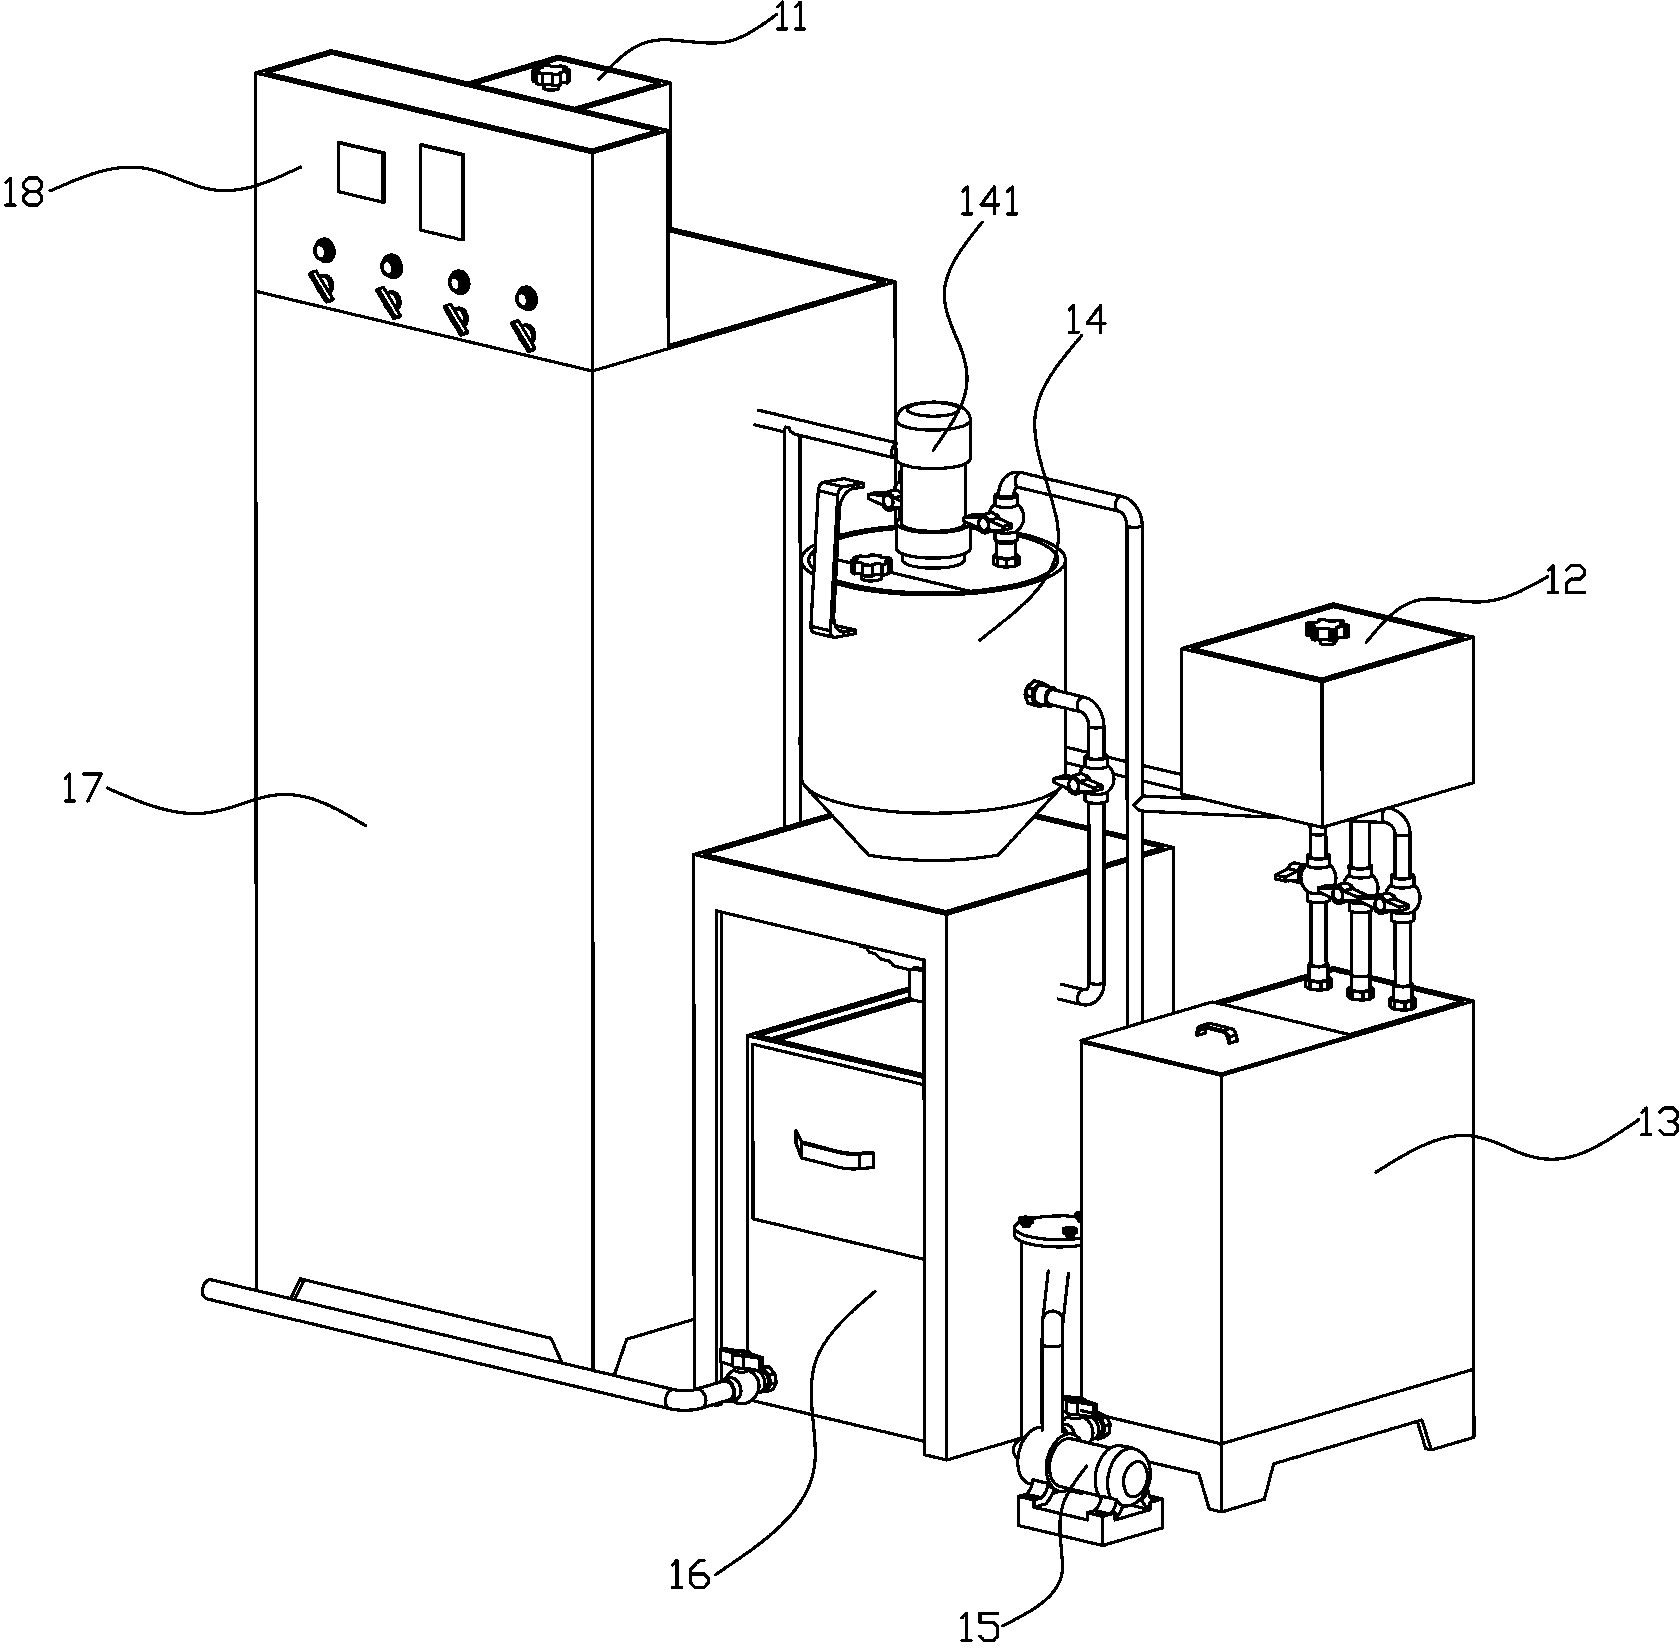 Silver cyanide manufacturing technology and equipment thereof